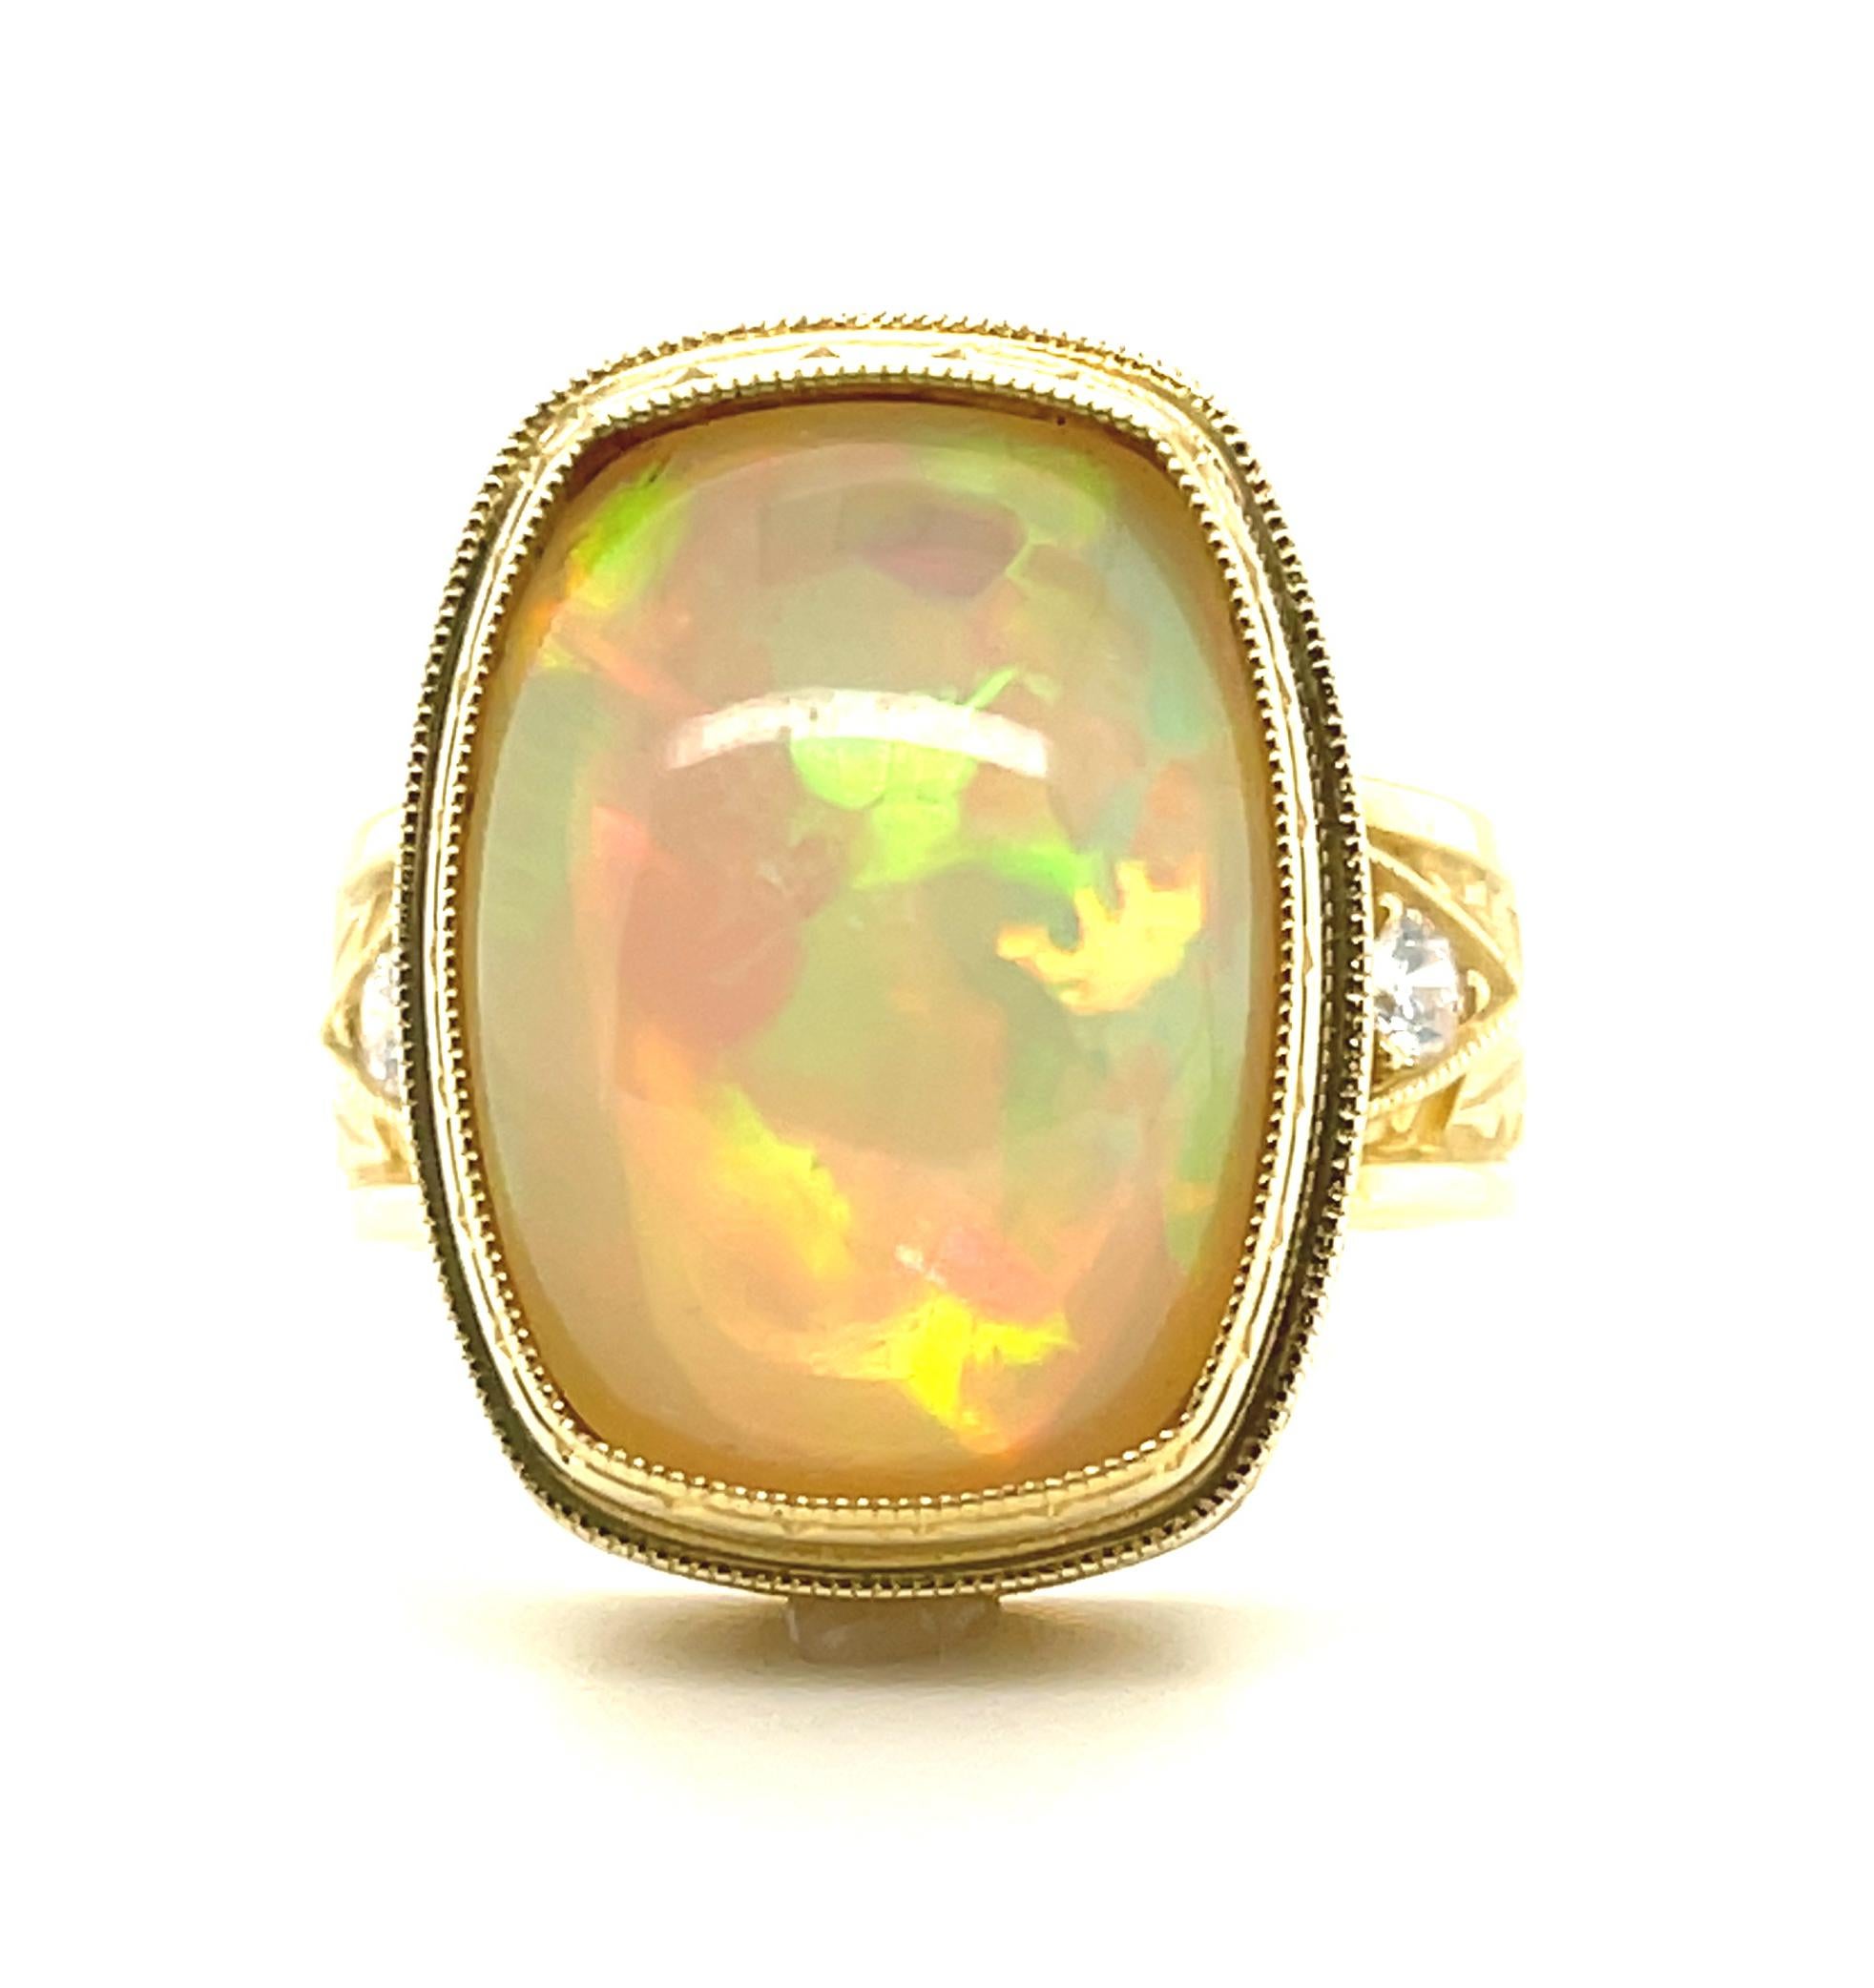 This spectacular ring can be worn on any finger and will complement every color in your wardrobe! It features a large, cushion-shaped Ethiopian opal that weighs 9.37 carats and is of exceptionally fine quality. This phenomenal gemstone displays all